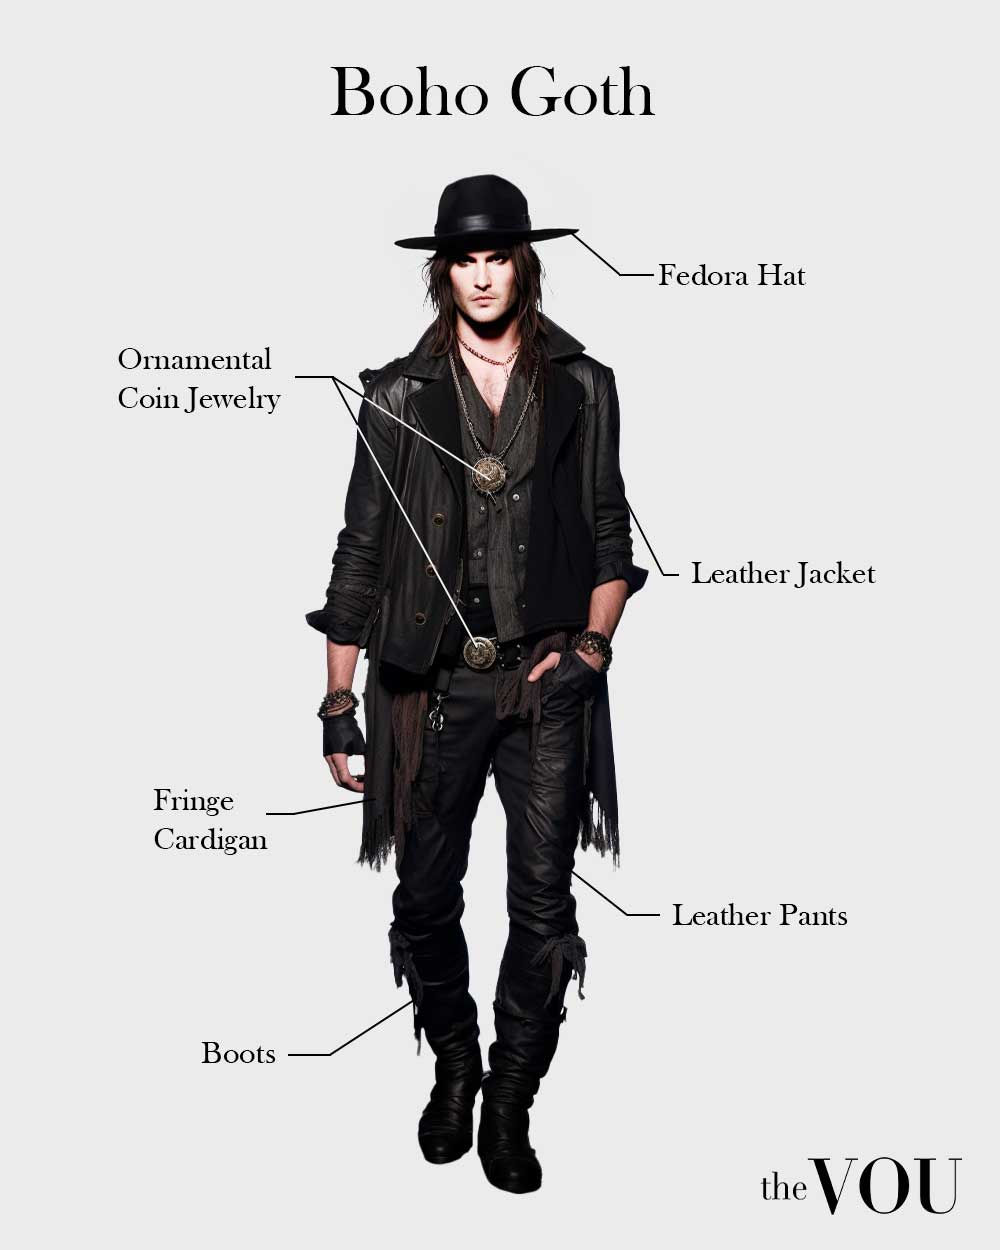 boho goth outfit for man: fedora hat, leather jacker, leathet pants, boots